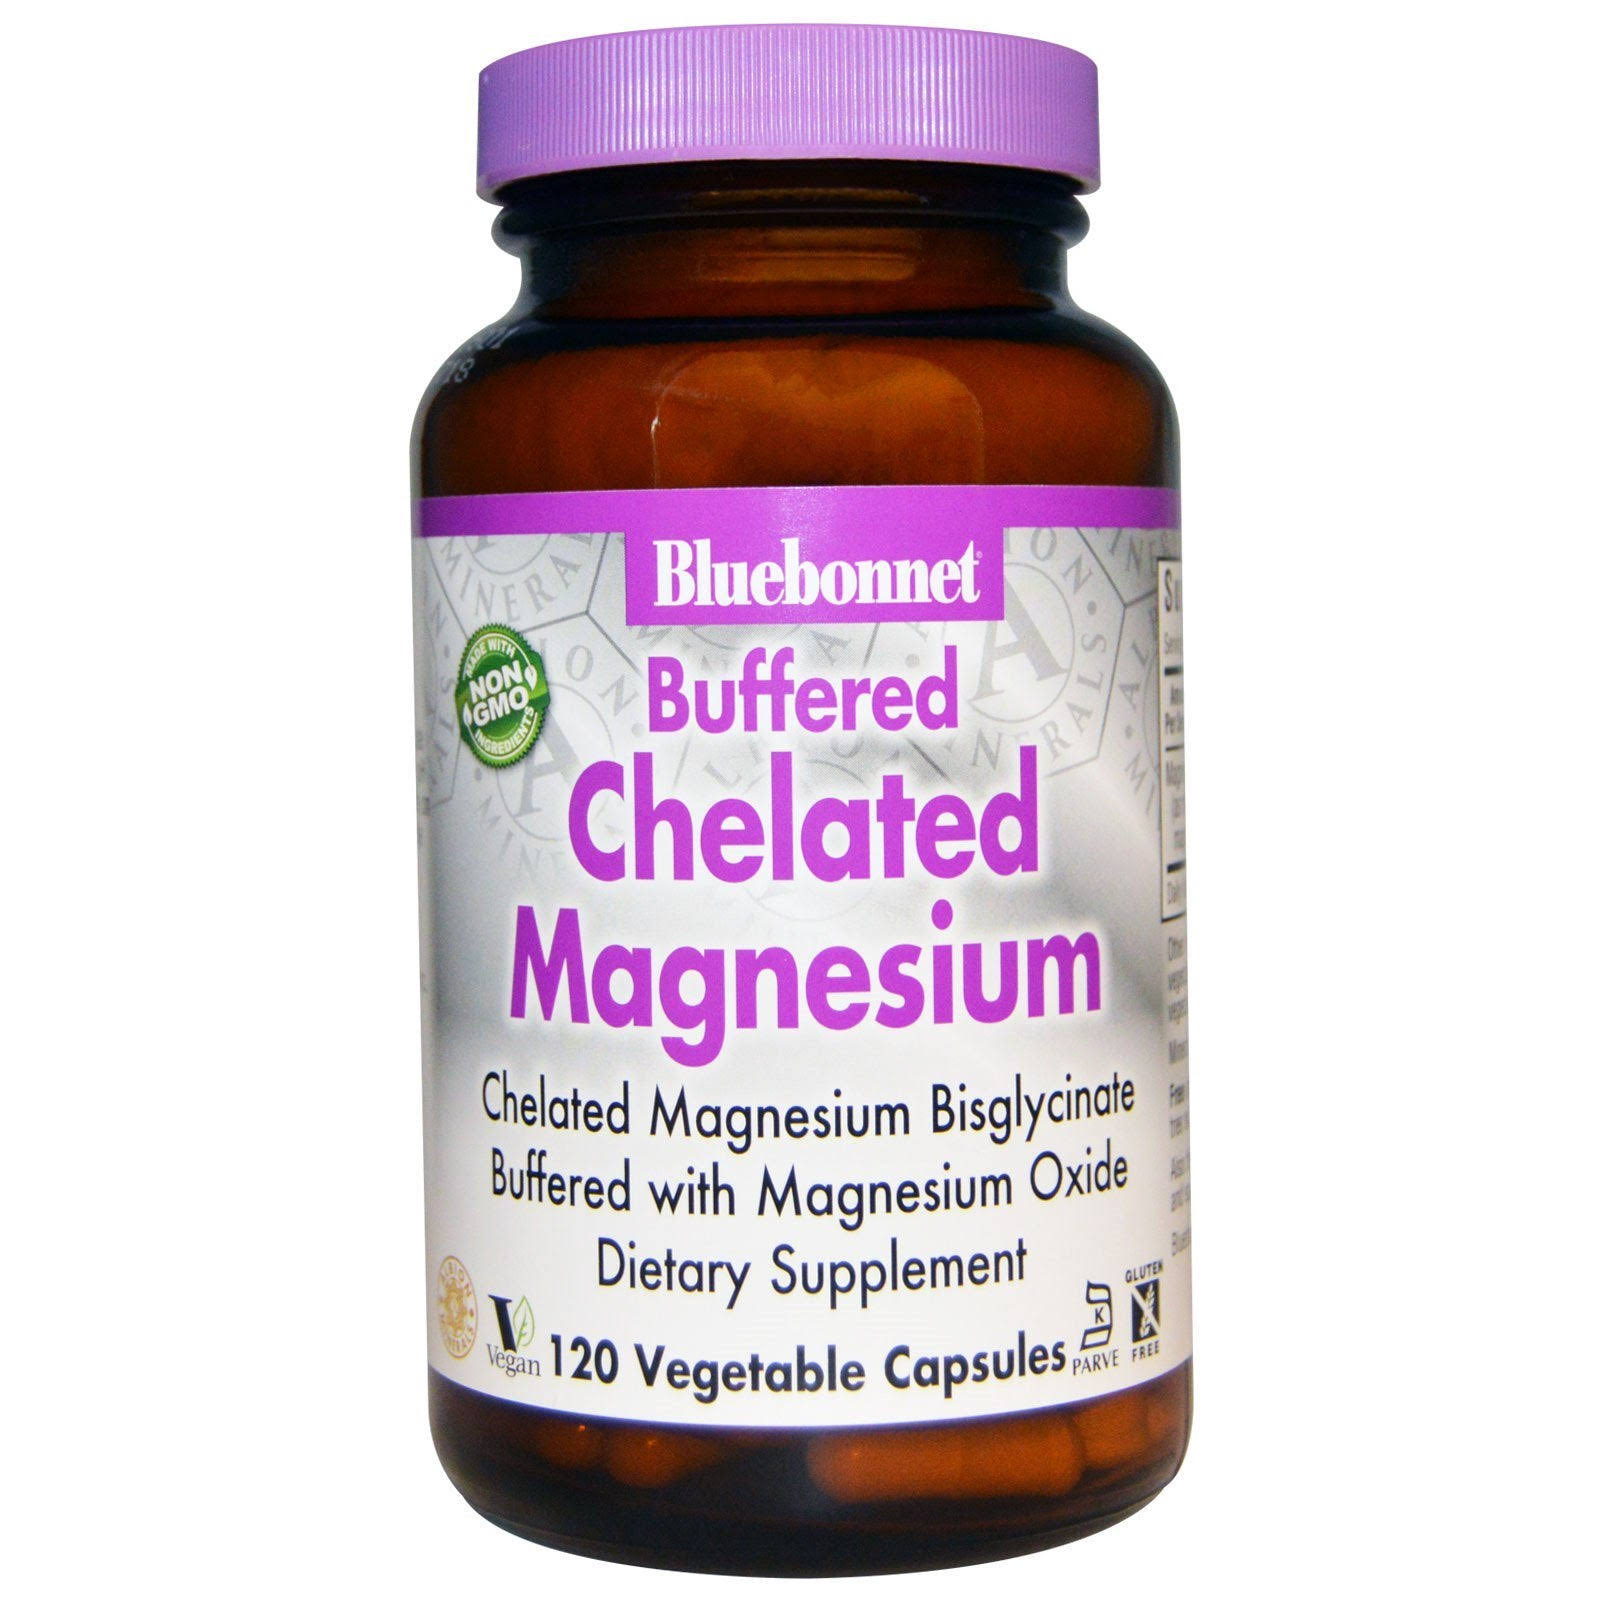 Bluebonnet Albion Buffered Chelated Magnesium 120 Capsules